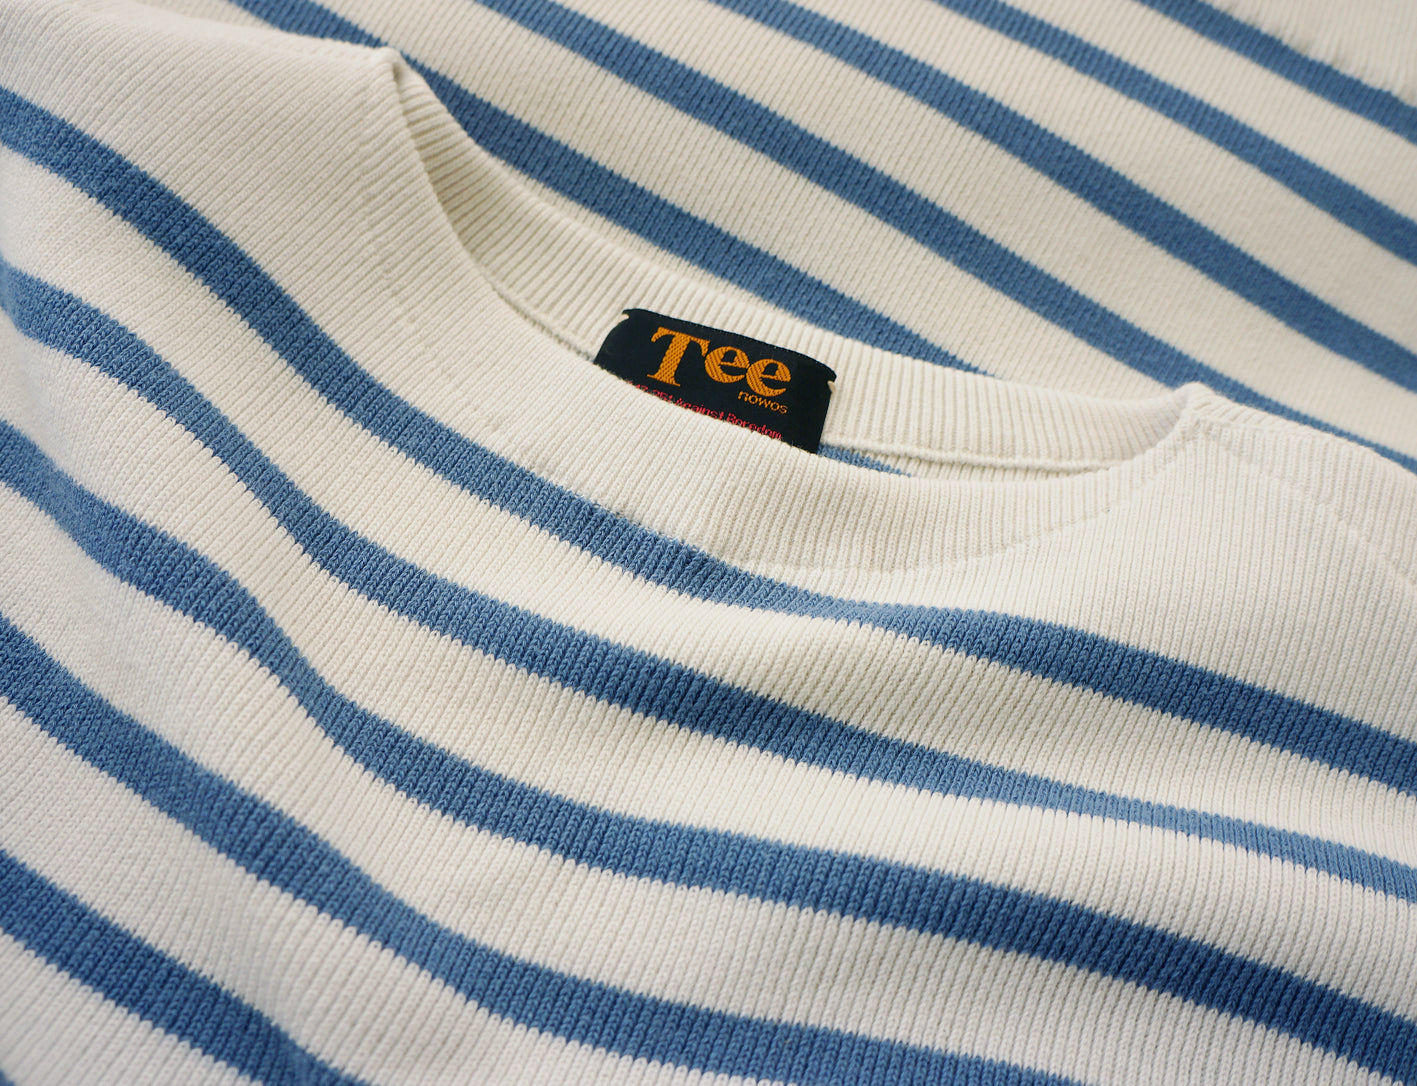 Striped T-Shirt (Tee nowos) – nowos official web